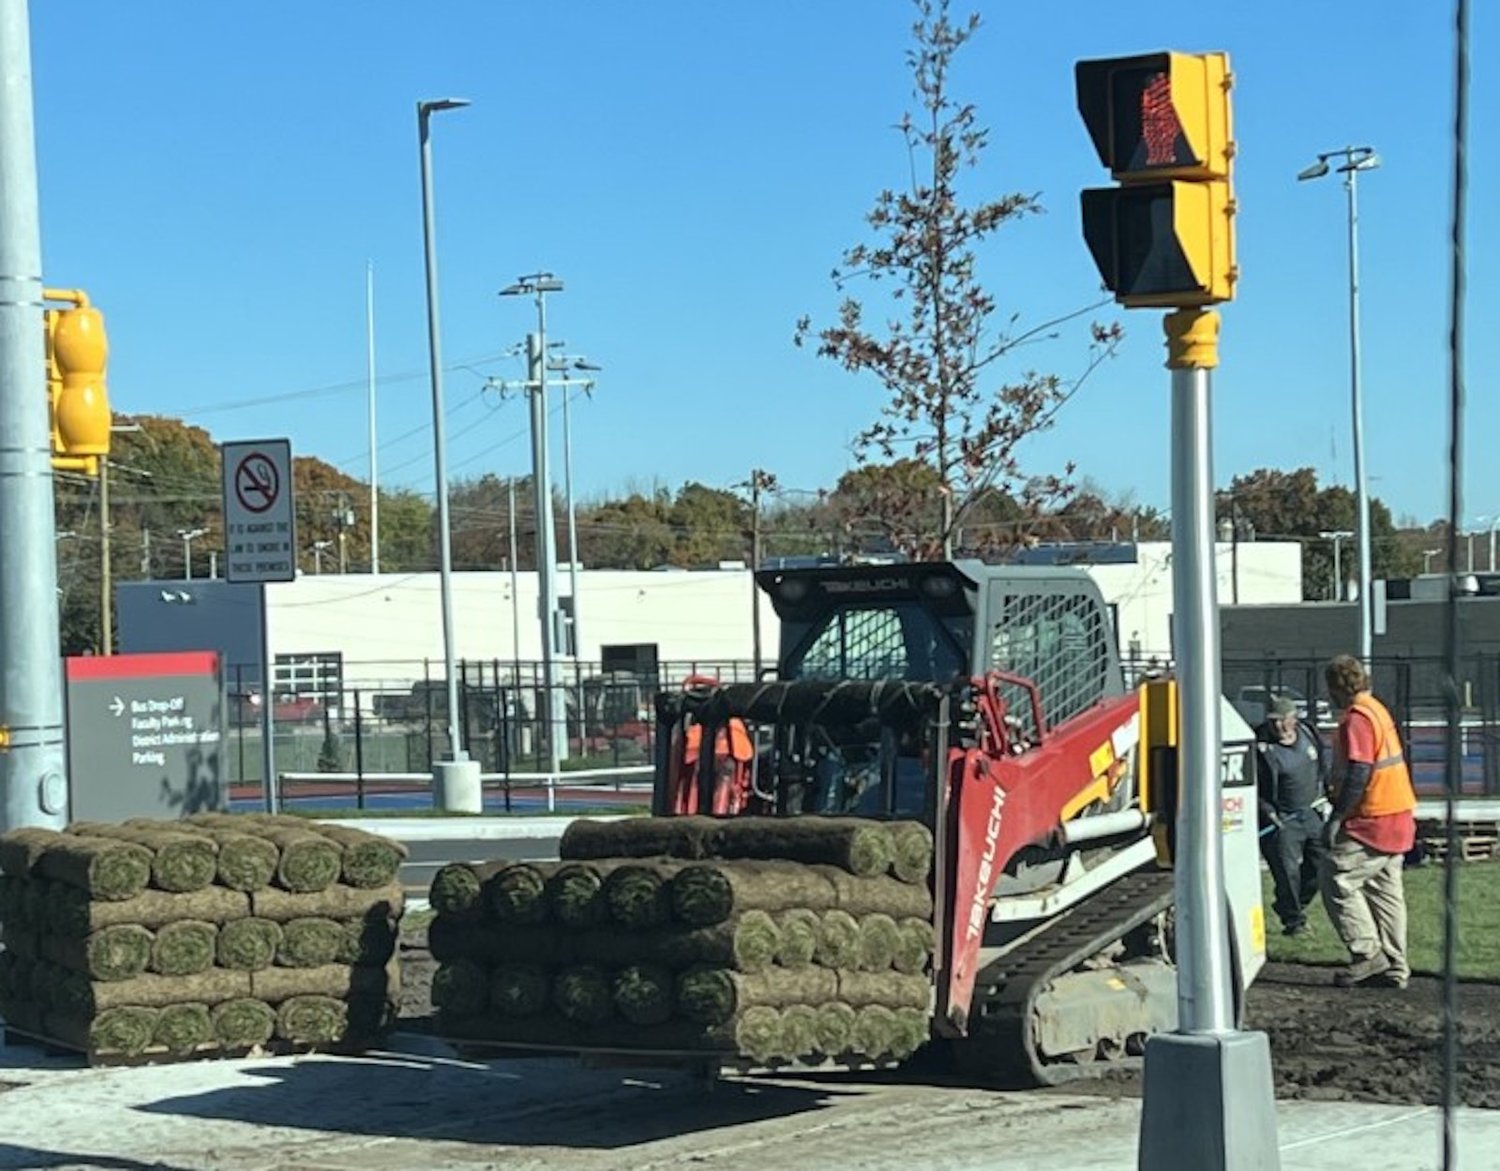 Workers install sod on the grounds of the high school on Saturday, Oct. 29.